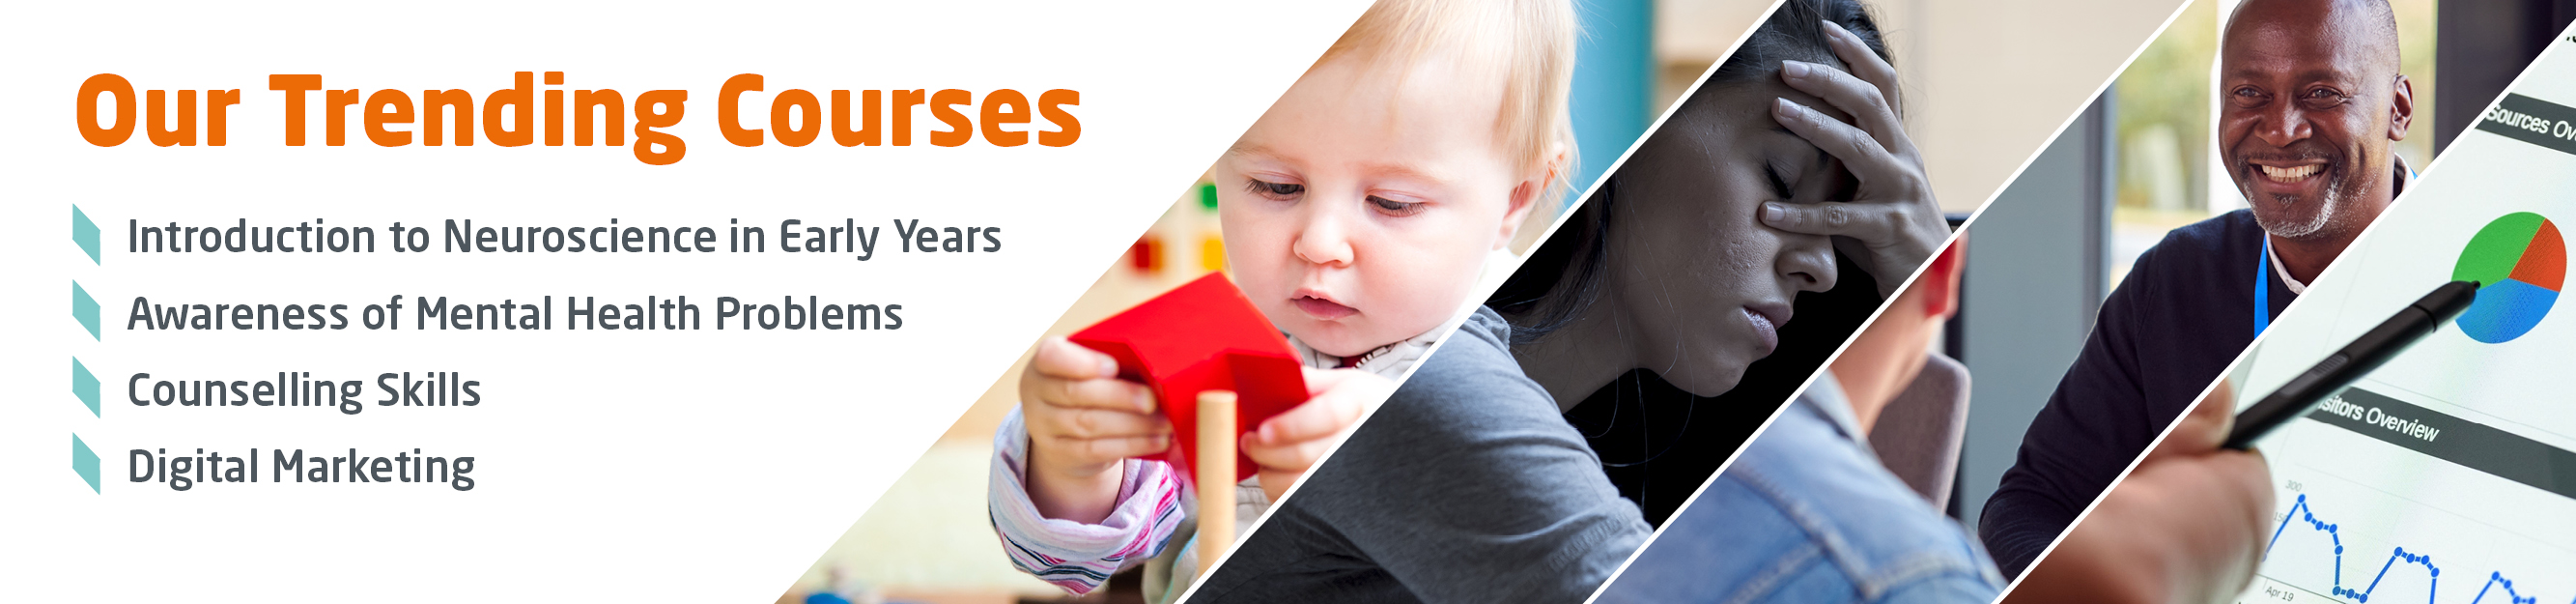 Our Trending Courses - Introduction to Neuroscience in Early Years, Awareness of Mental Health Problems, Counselling Skills, Digital Marketing.